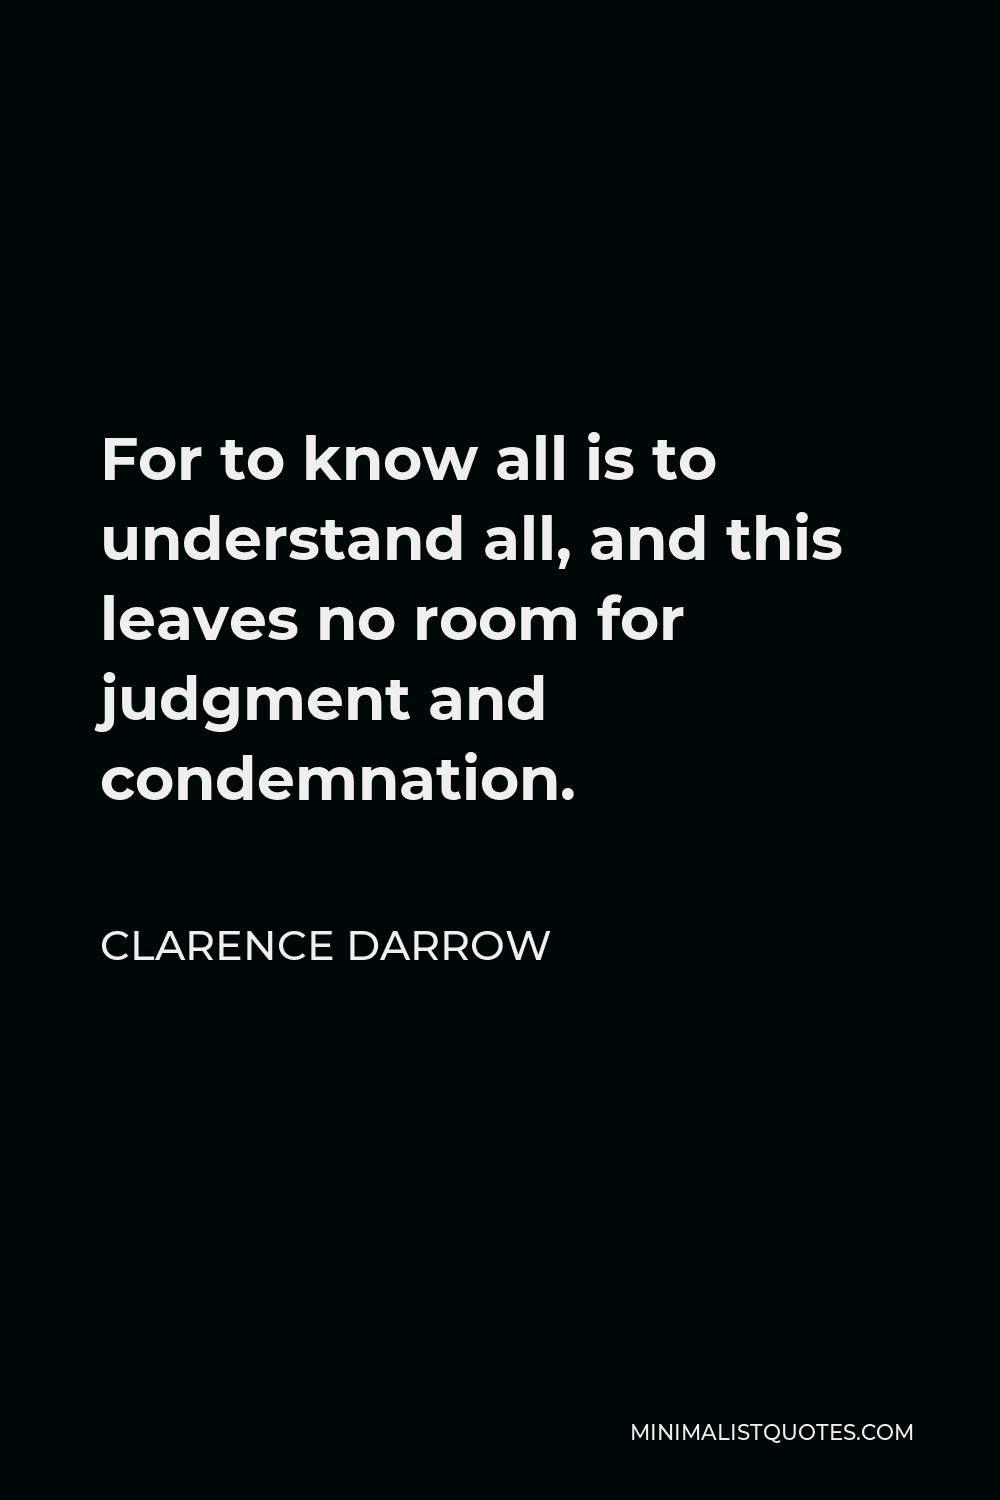 Clarence Darrow Quote - For to know all is to understand all, and this leaves no room for judgment and condemnation.